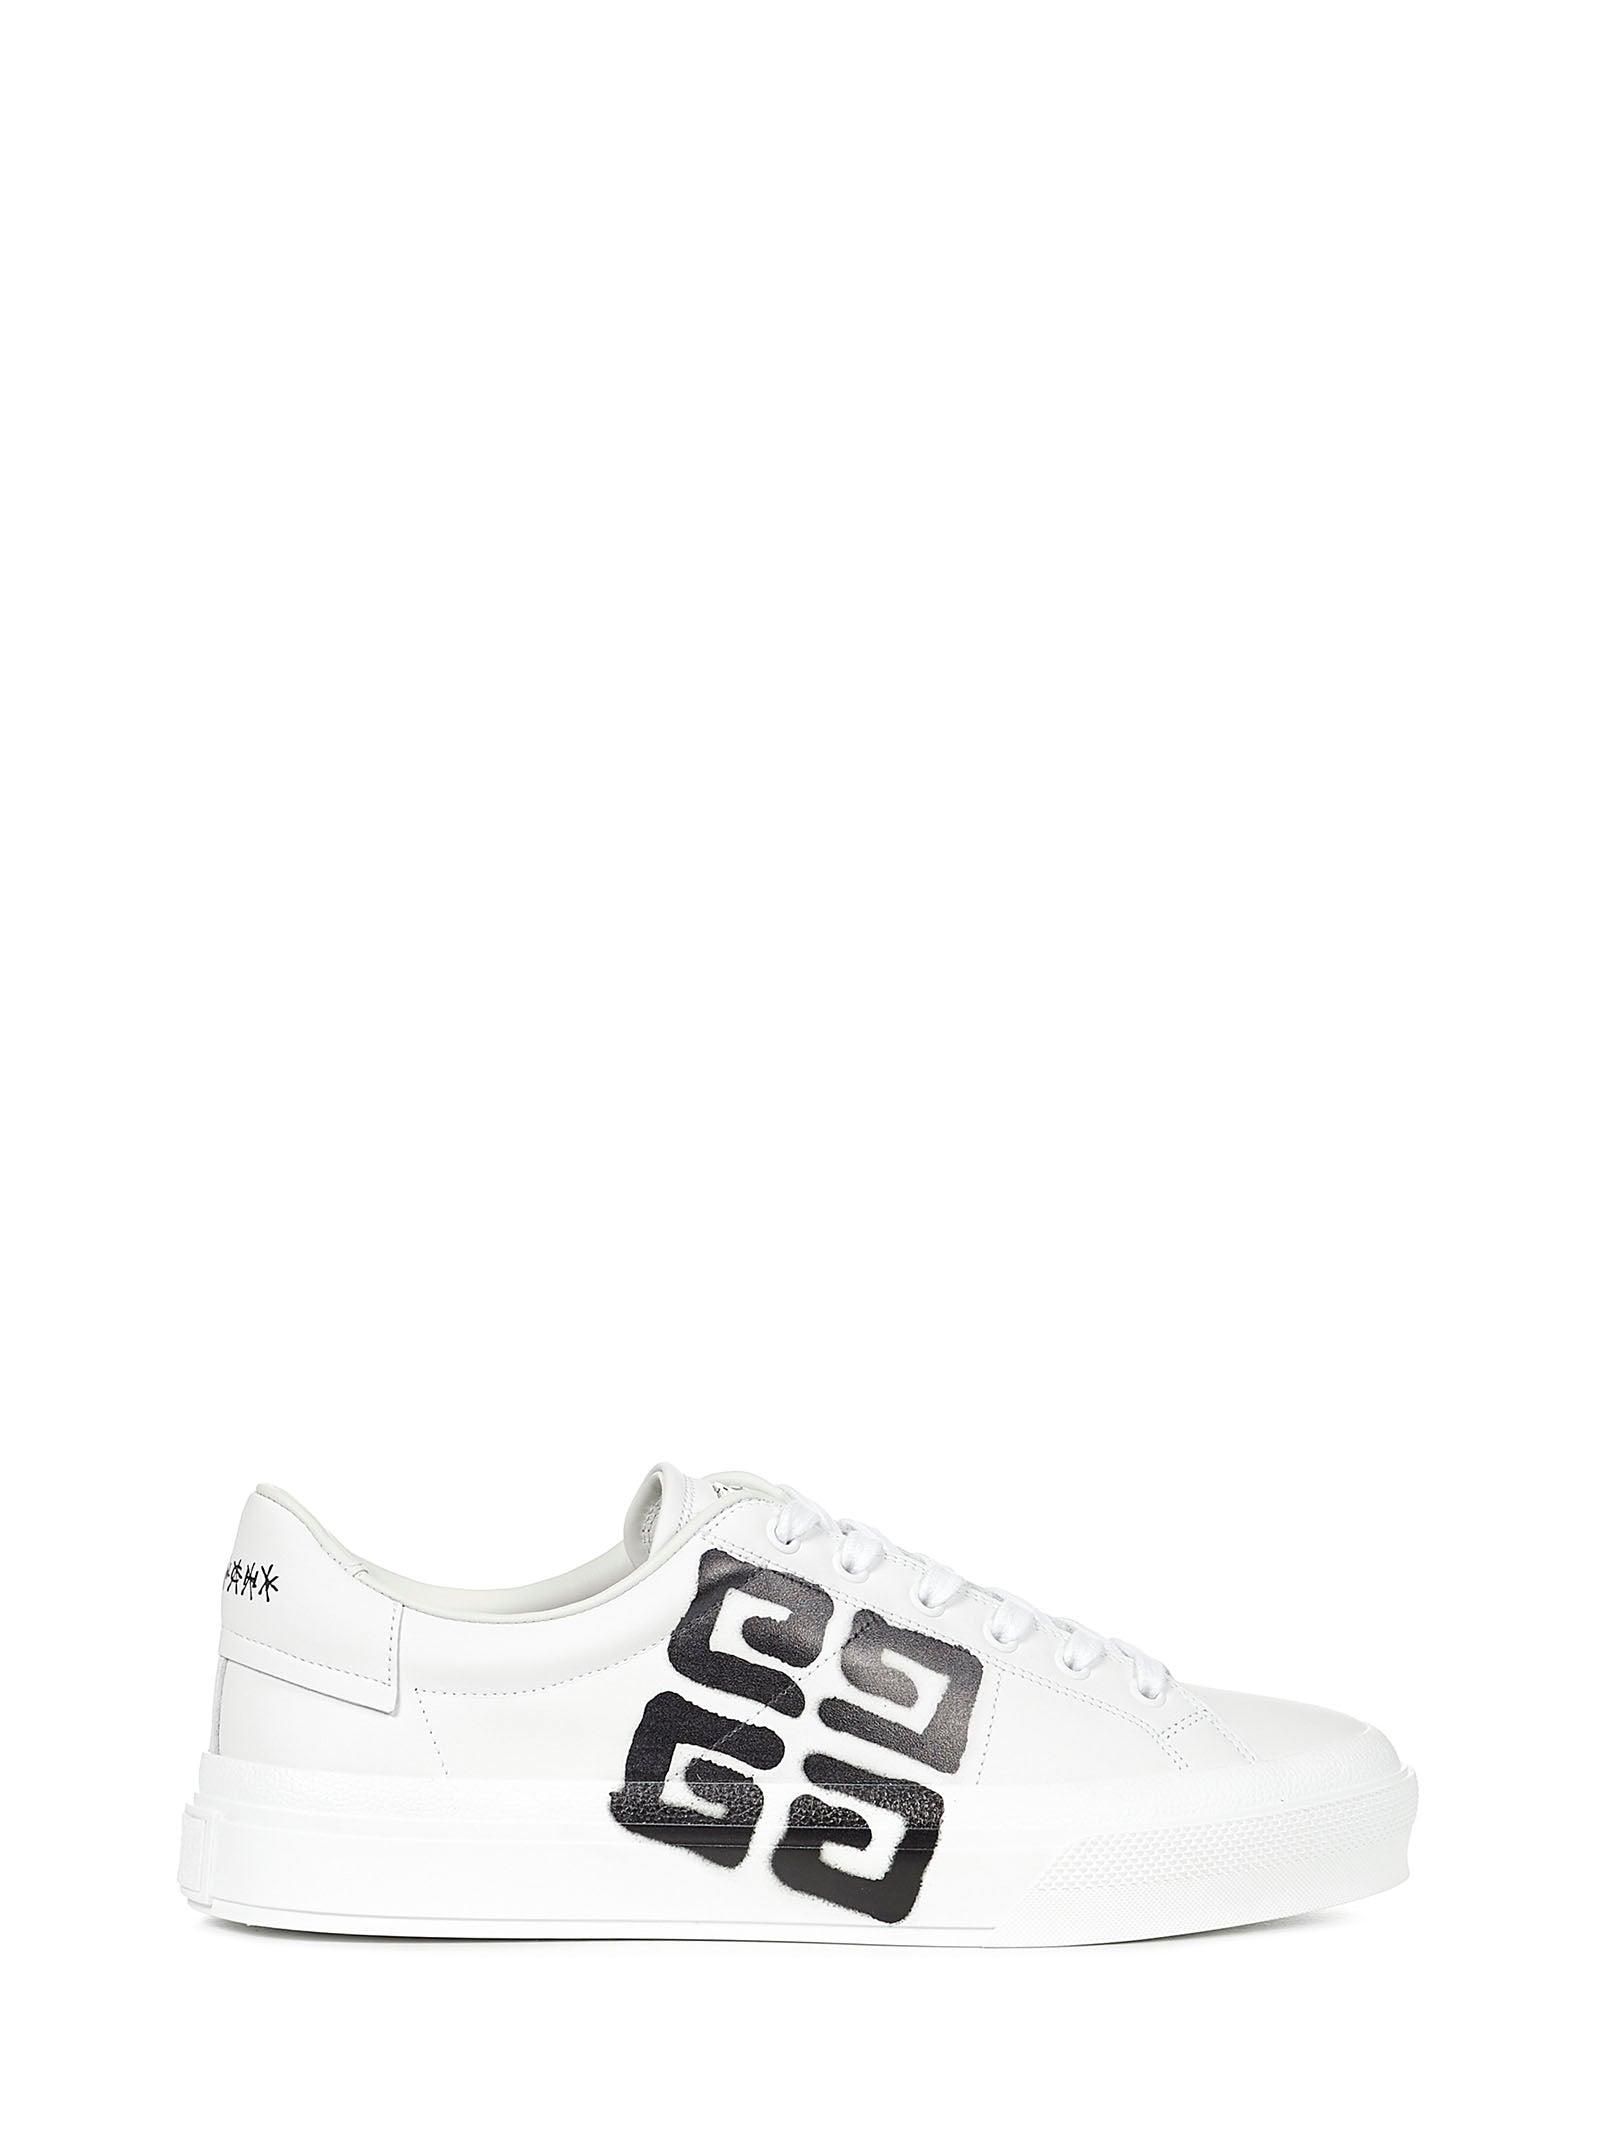 Givenchy Leather Sneakers White for Men - Lyst